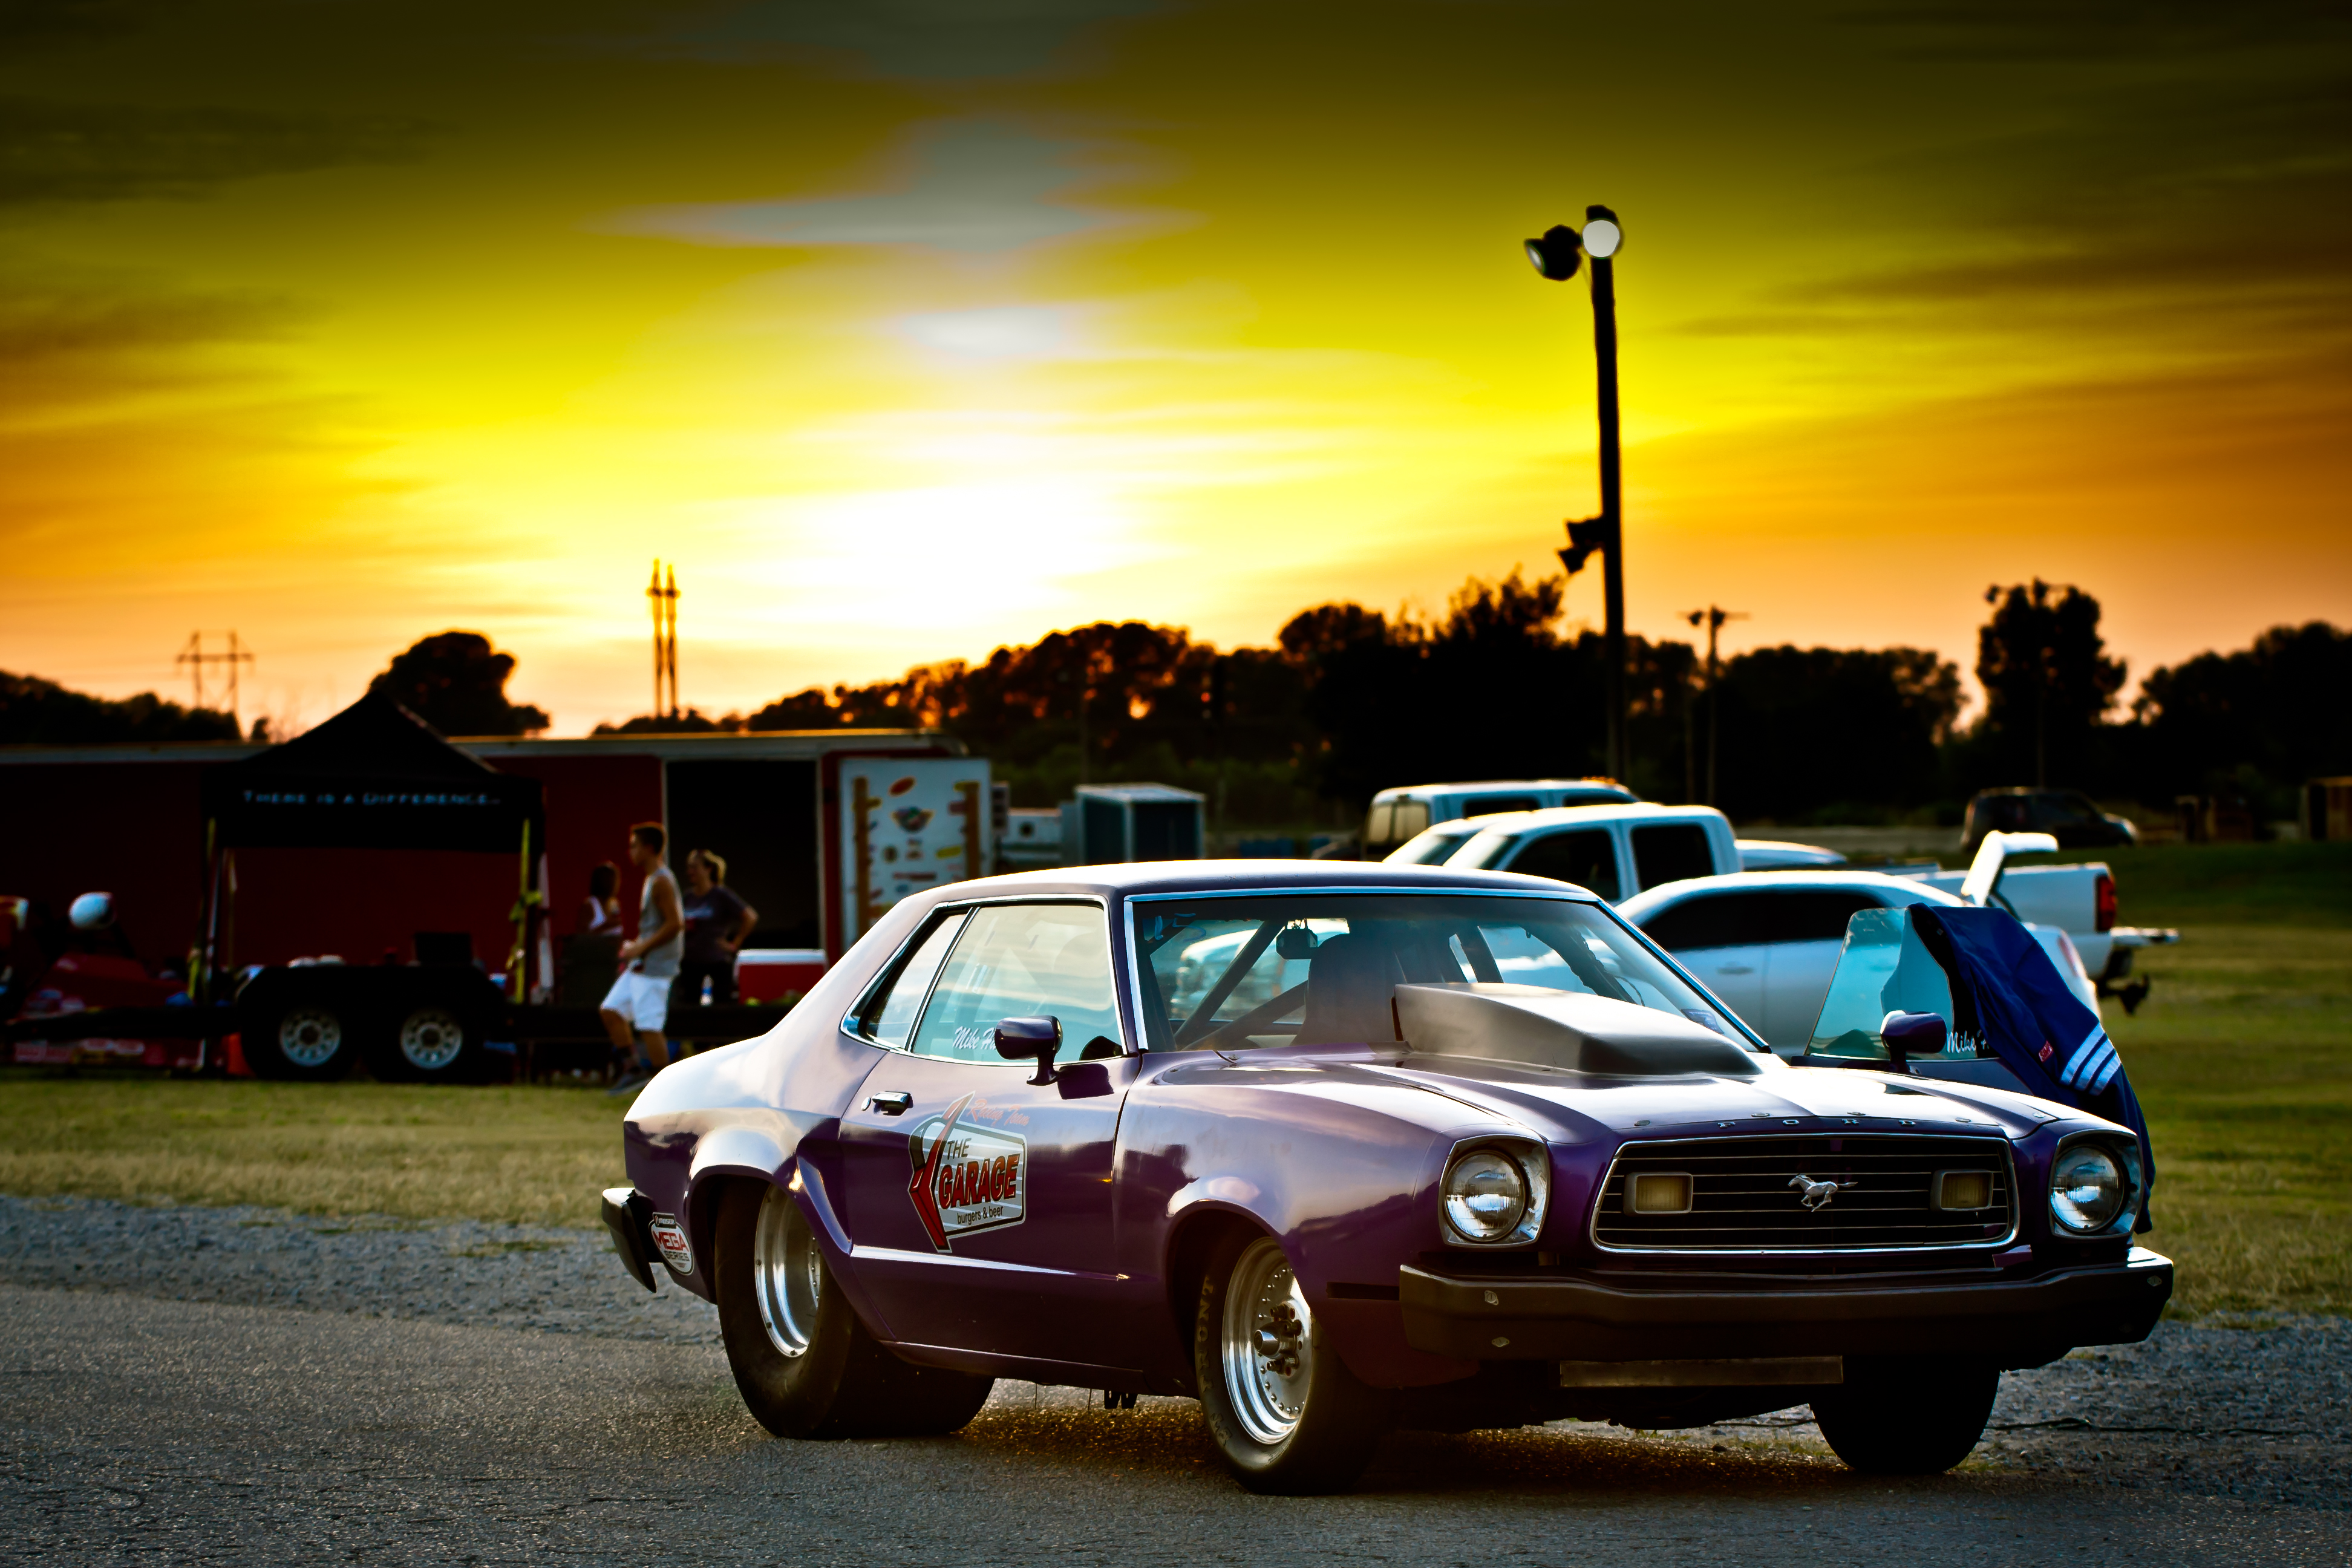 Sunset At The Drag Strip